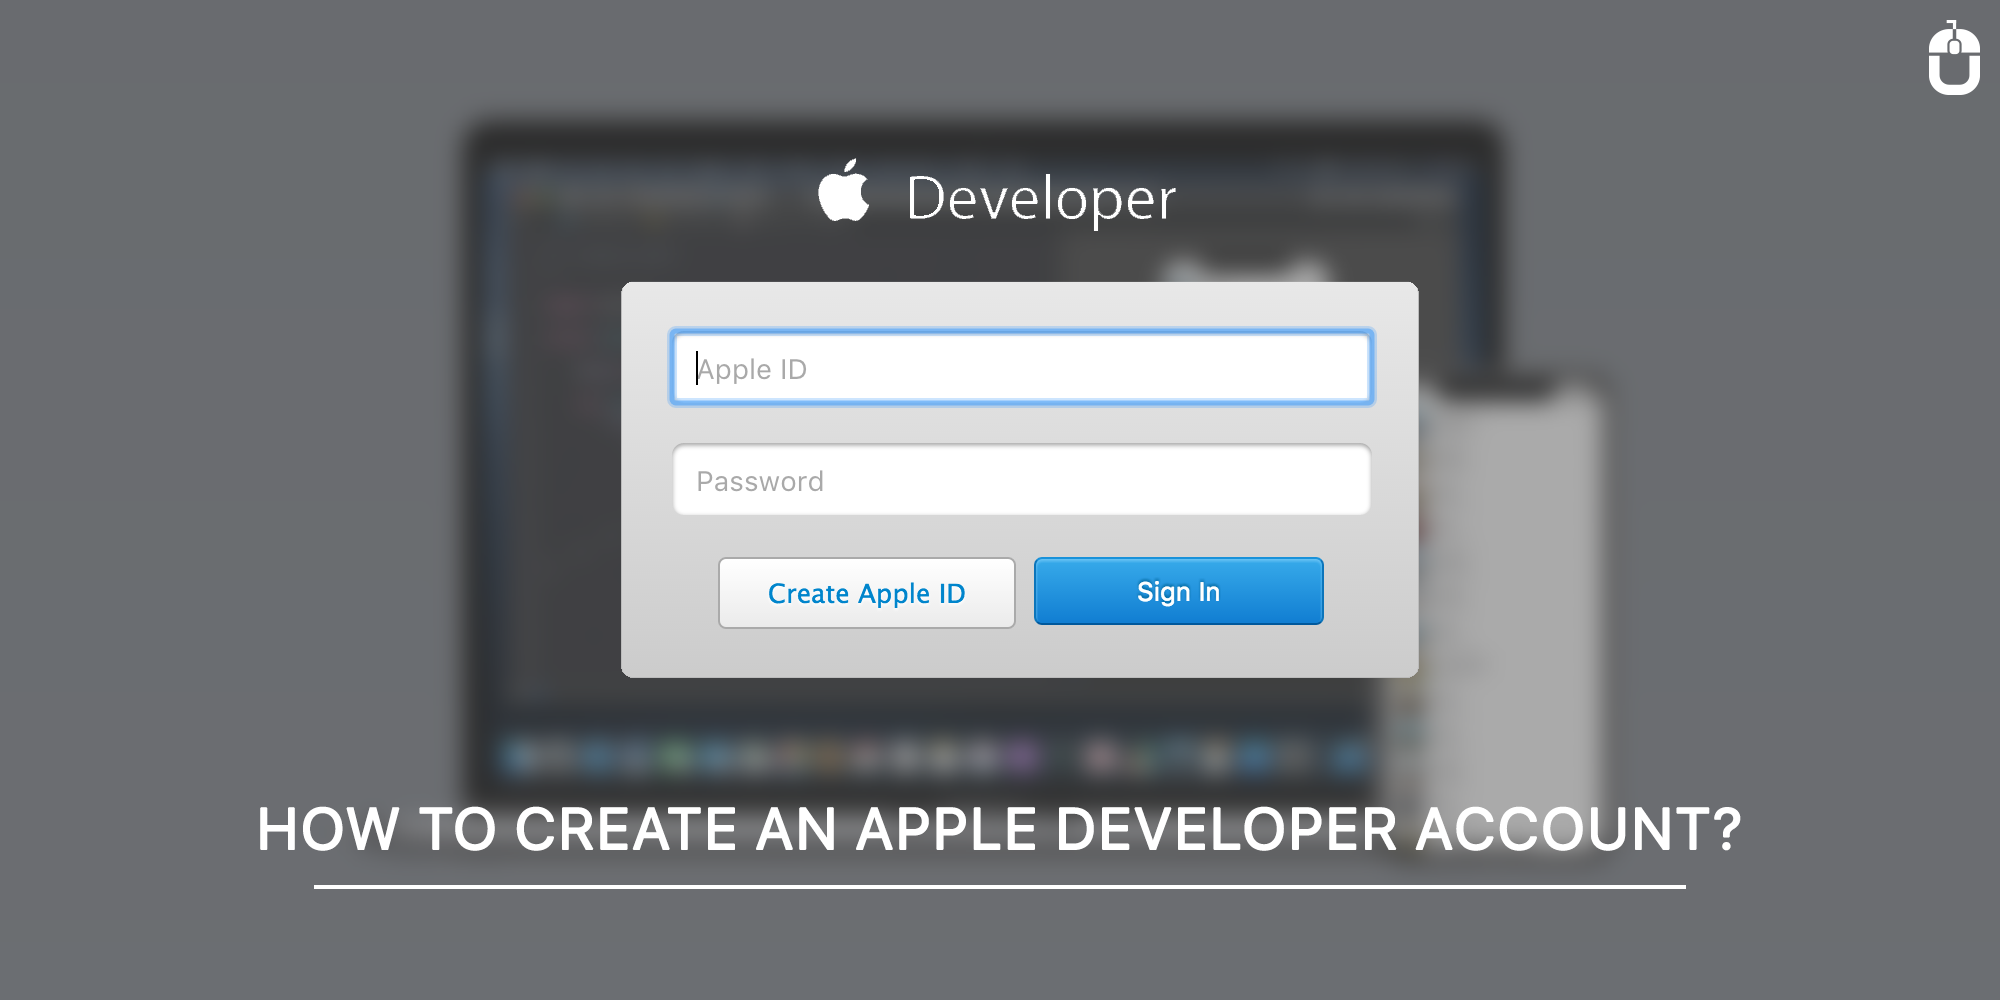 How To Create An Apple Developer Account?